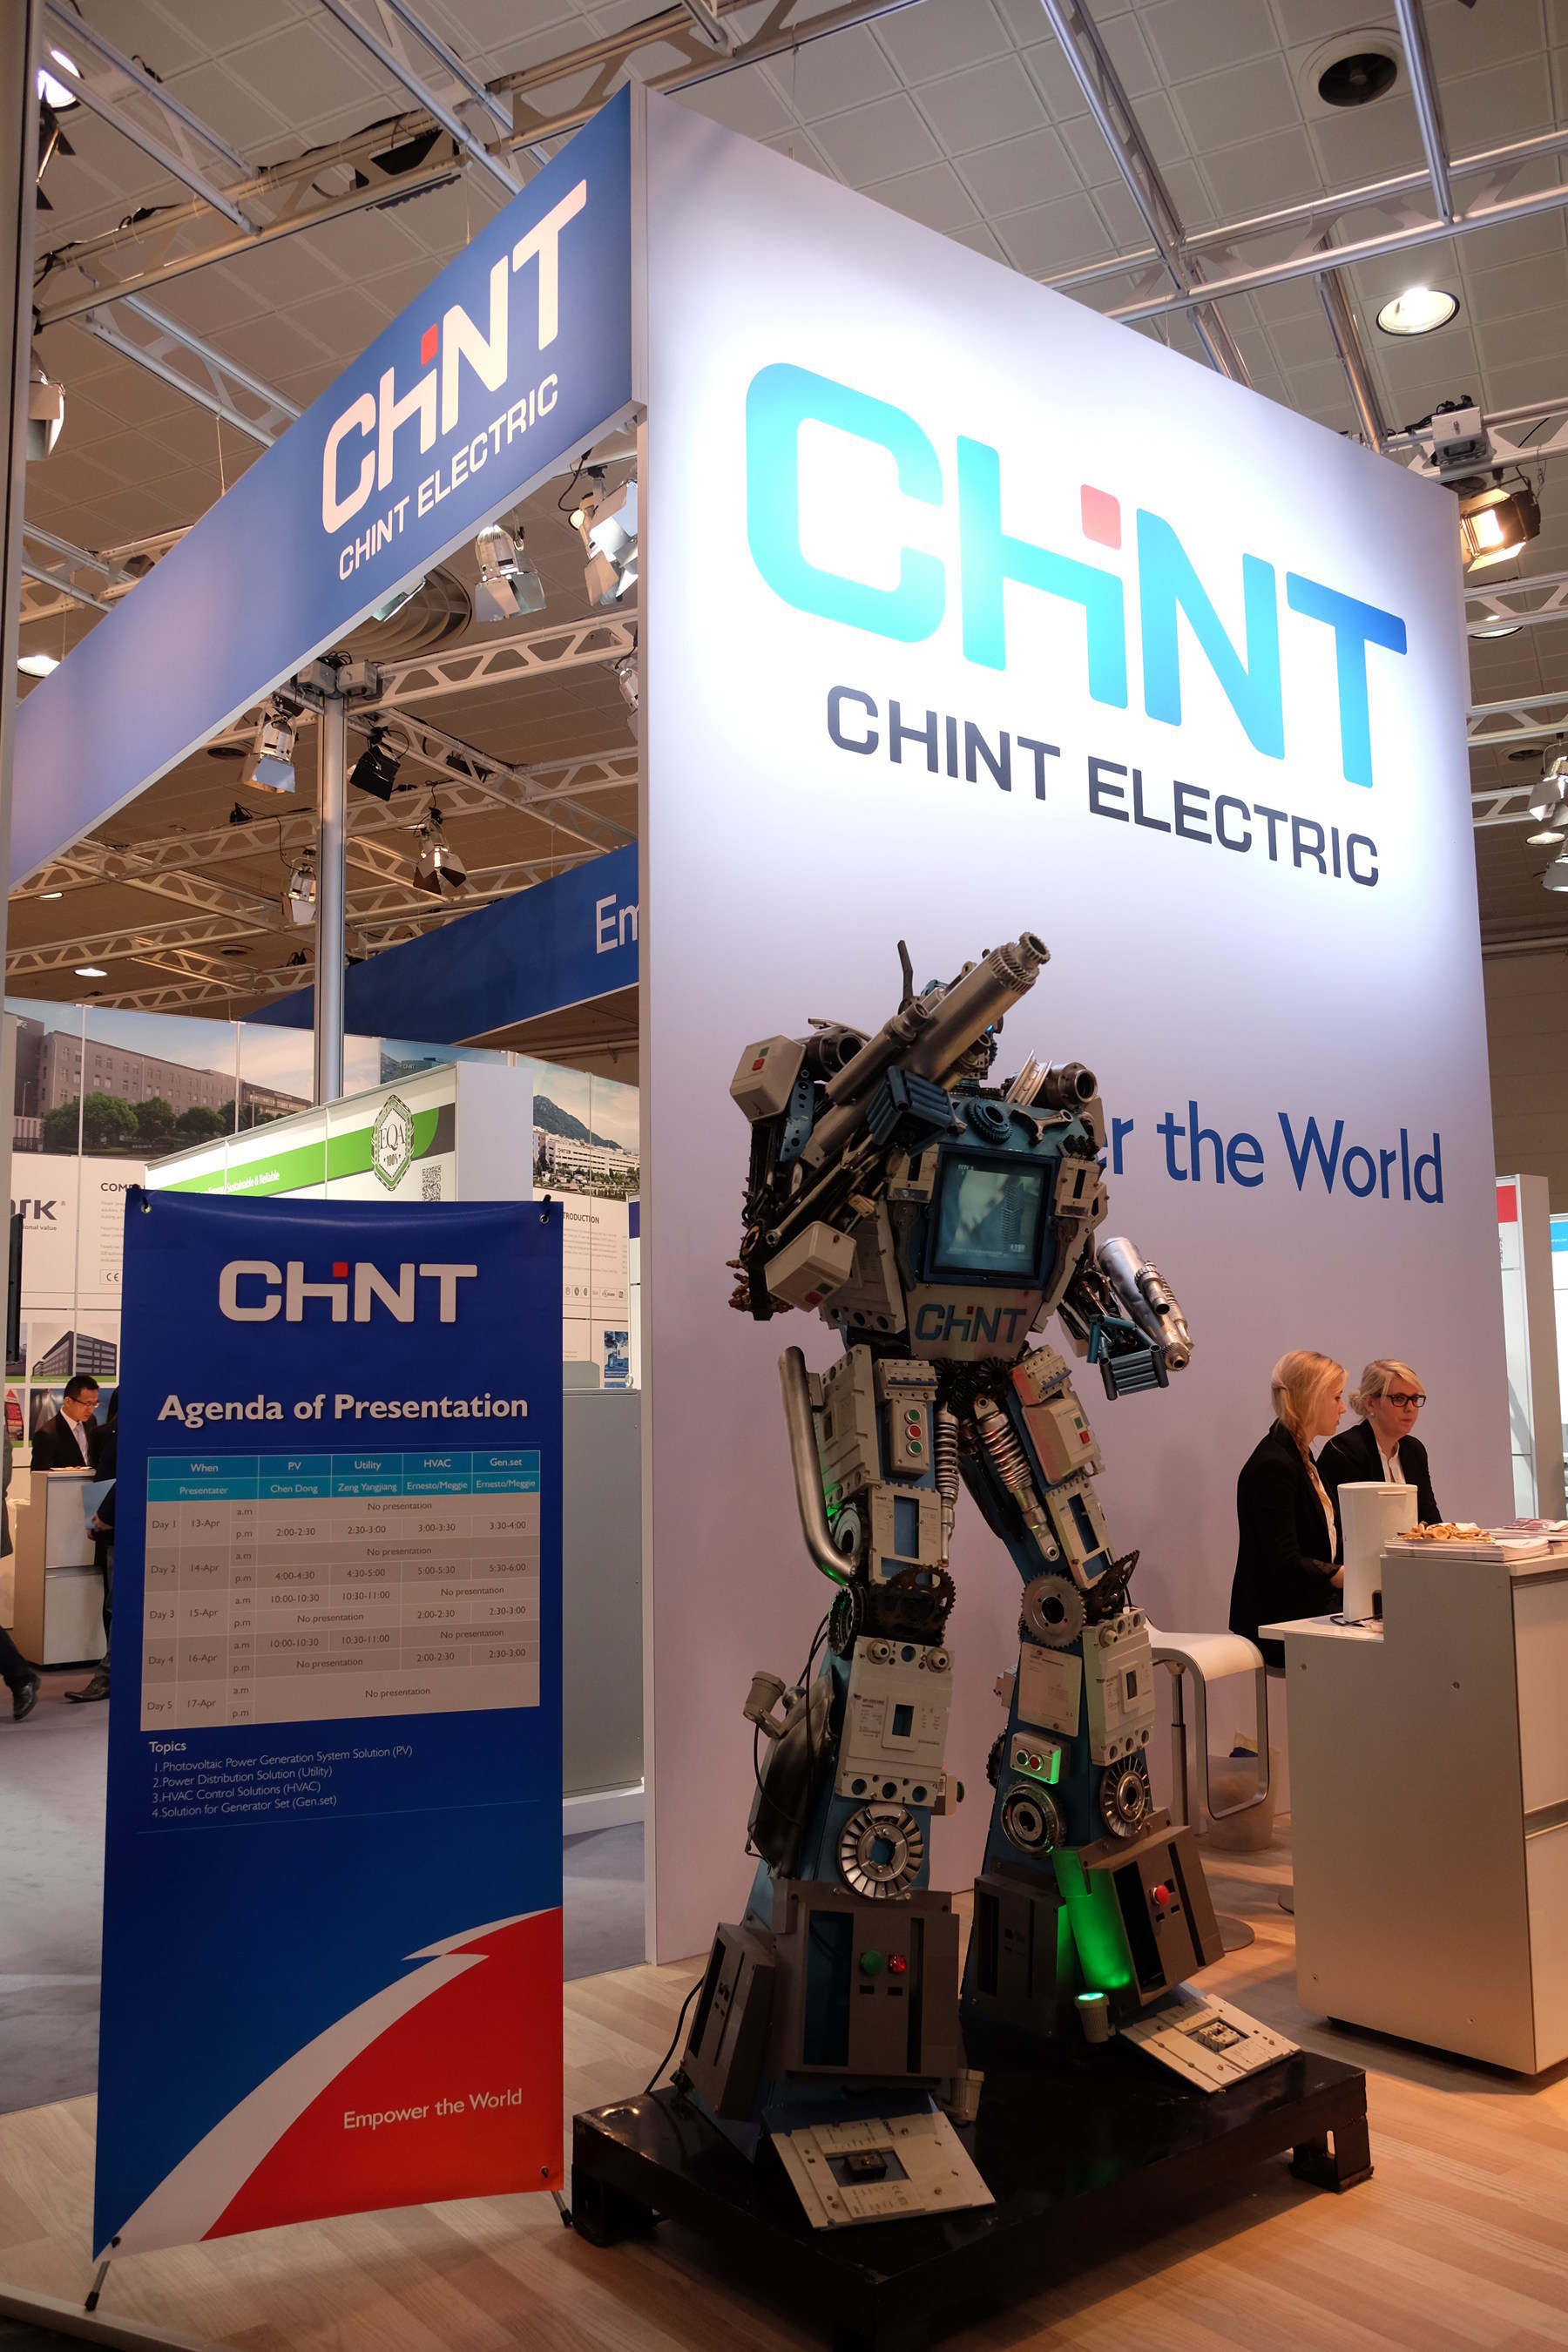 CHINT Electric Attend HANNOVER MESSE 2015